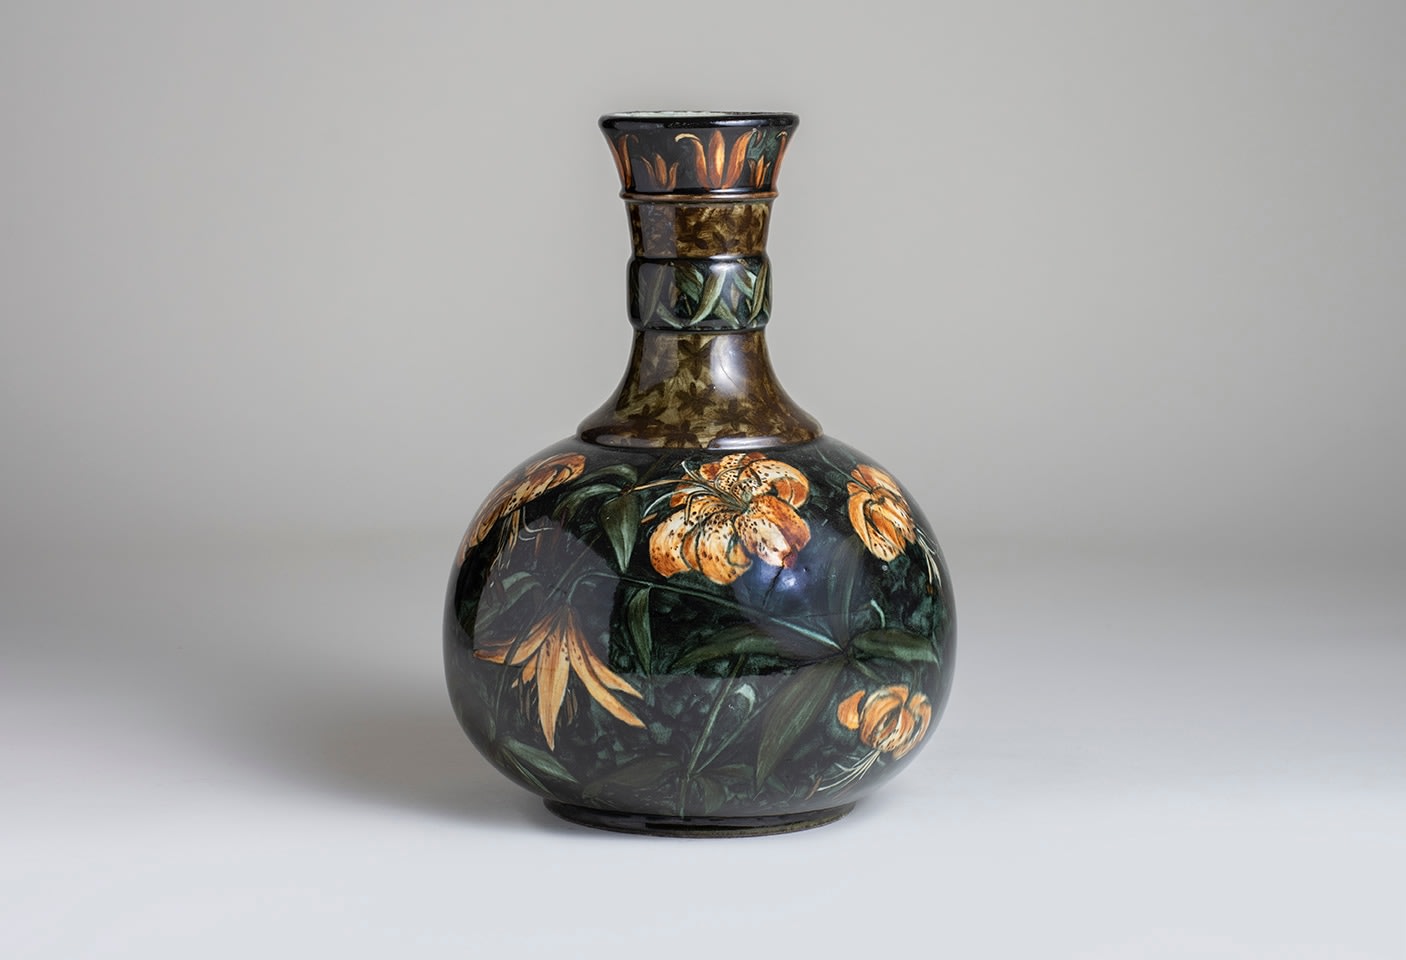 a bottle form ceramic vase with rounded body and thin cylindrical stem, with underglaze decoration of pale yellow lilies on a variegated dark green ground